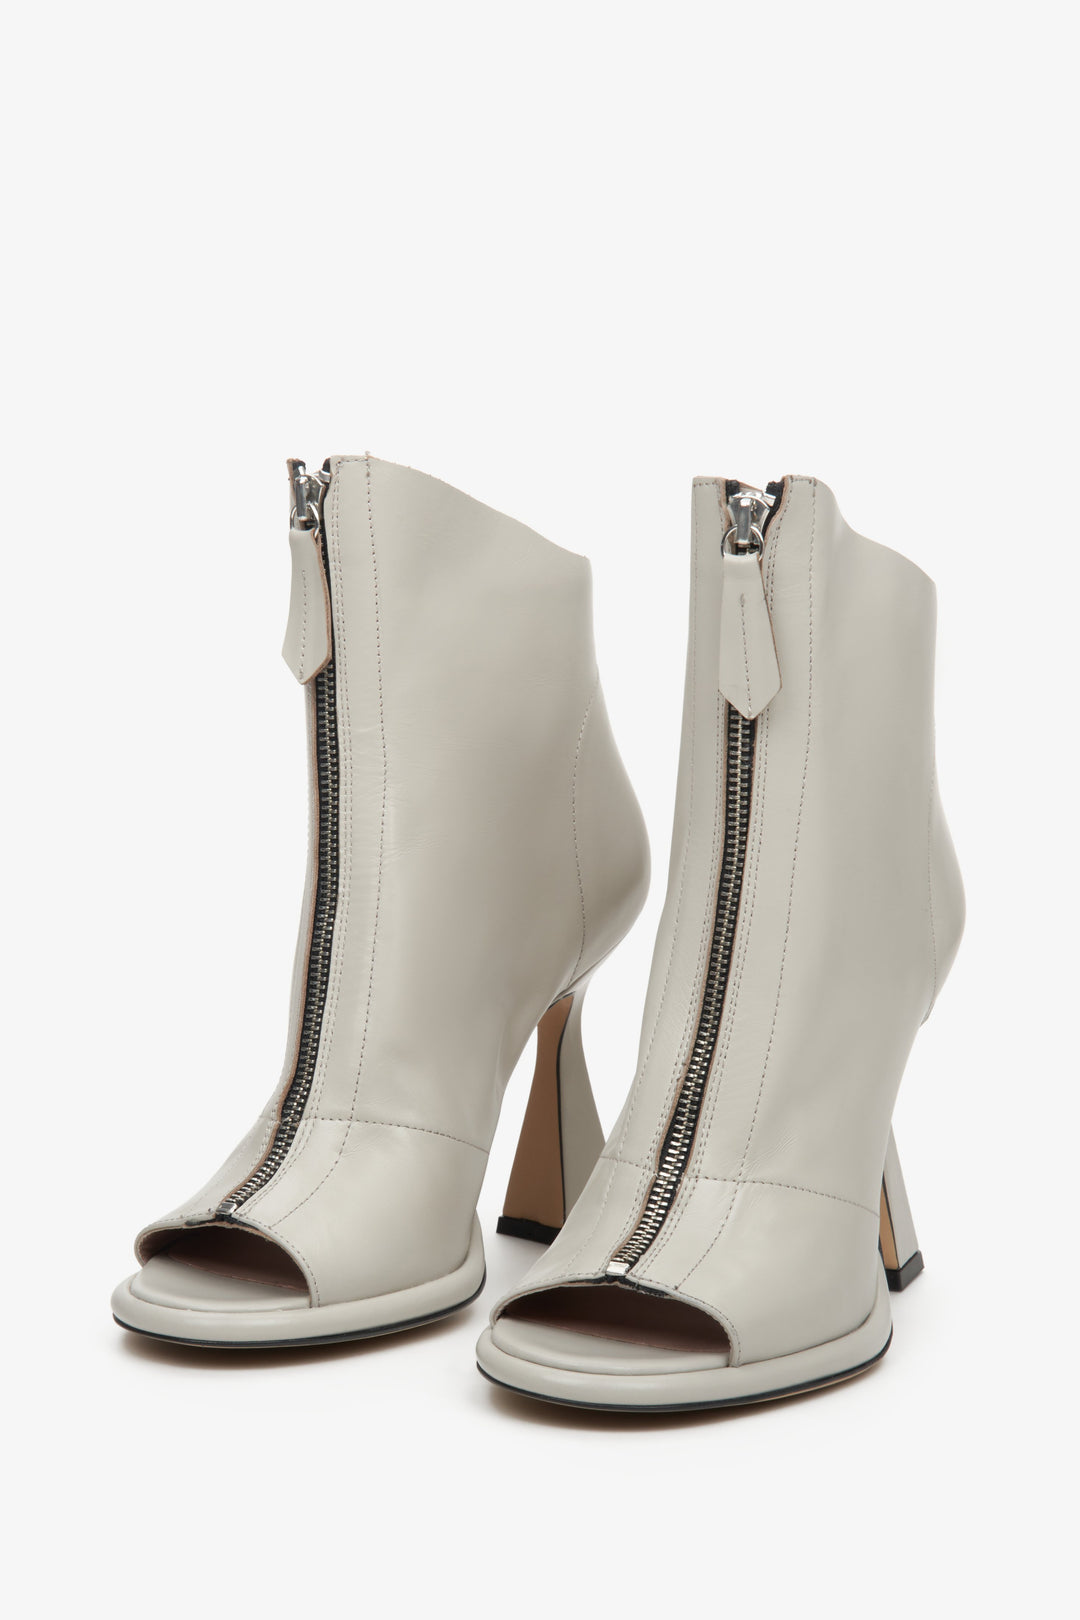 Women's heeled ankle boots made of natural leather in gray with an open toe.